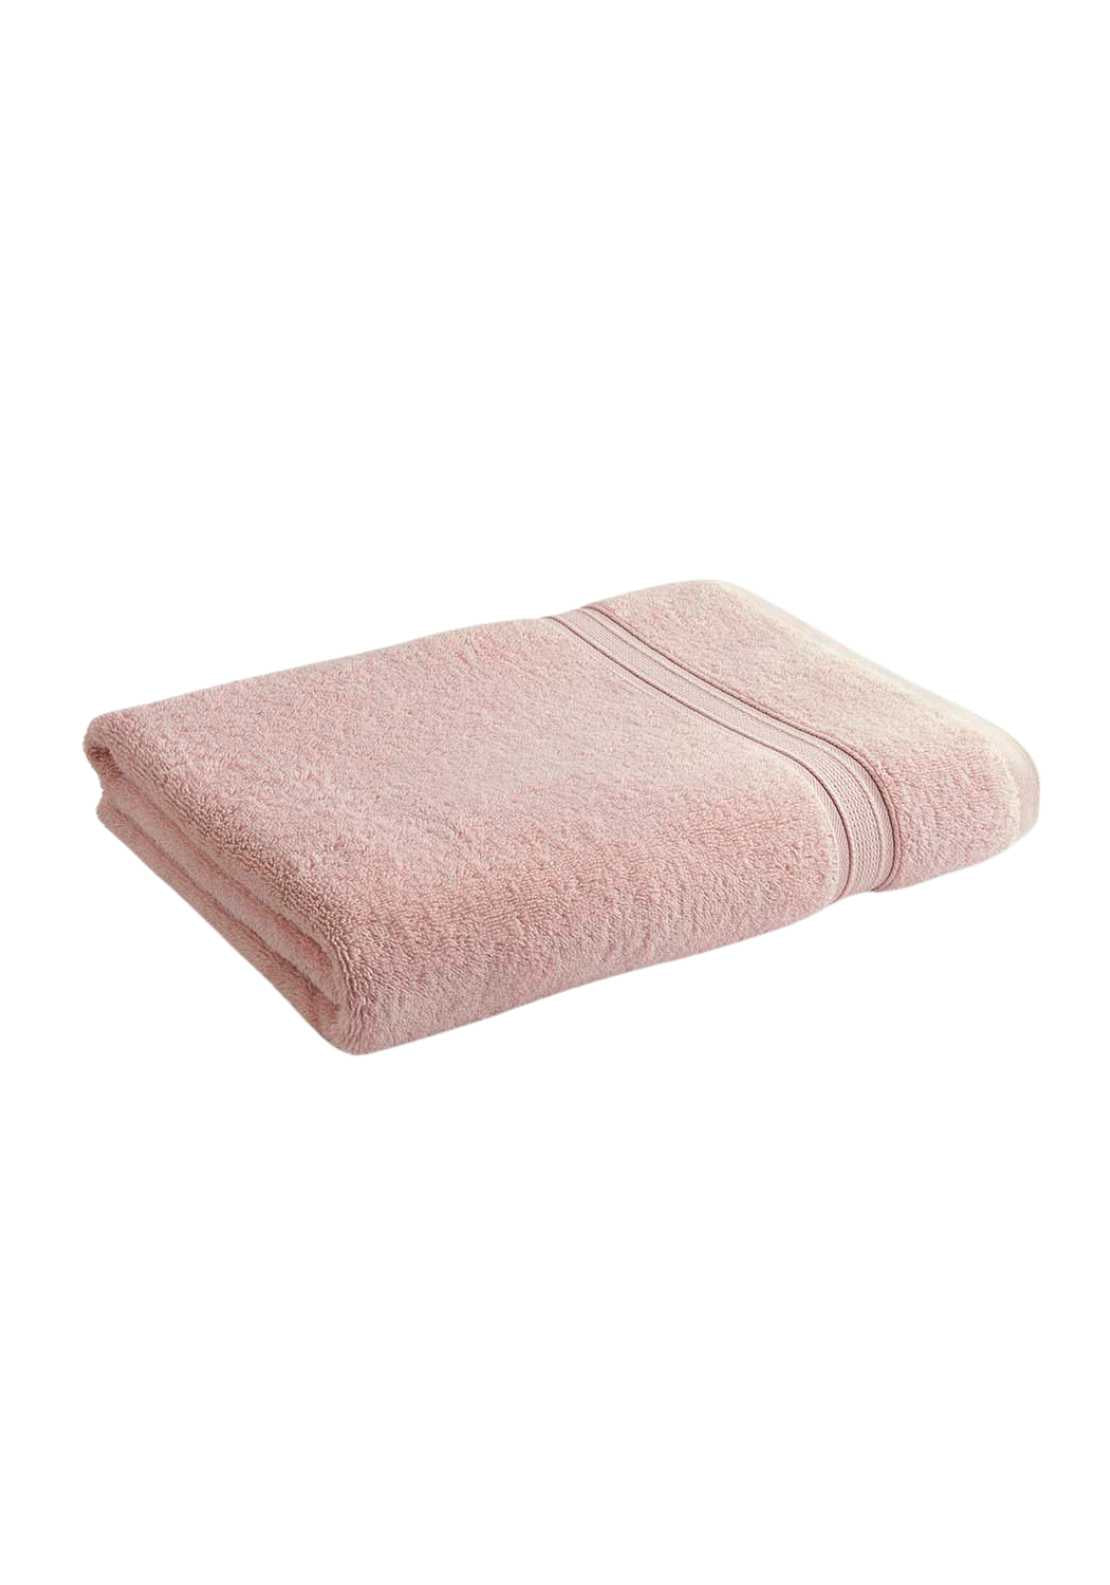 Christy Serene Bath Towel - Dusty Pink 1 Shaws Department Stores